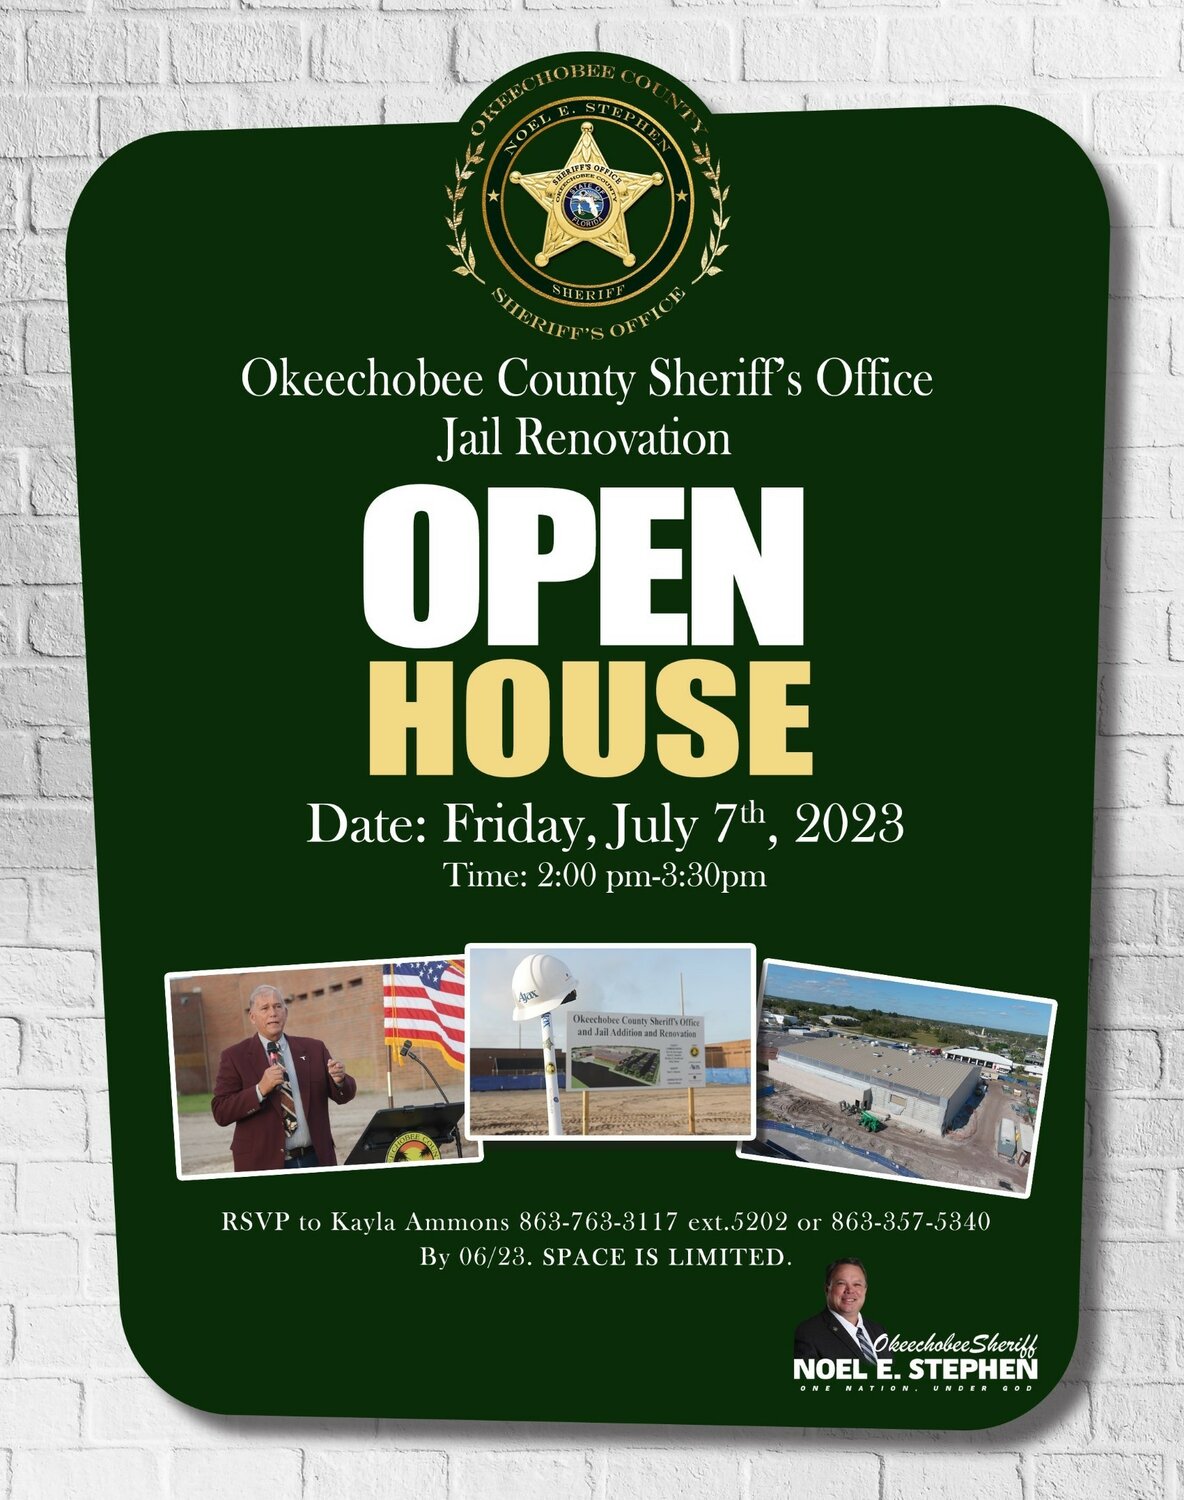 OCSO schedules Open House.